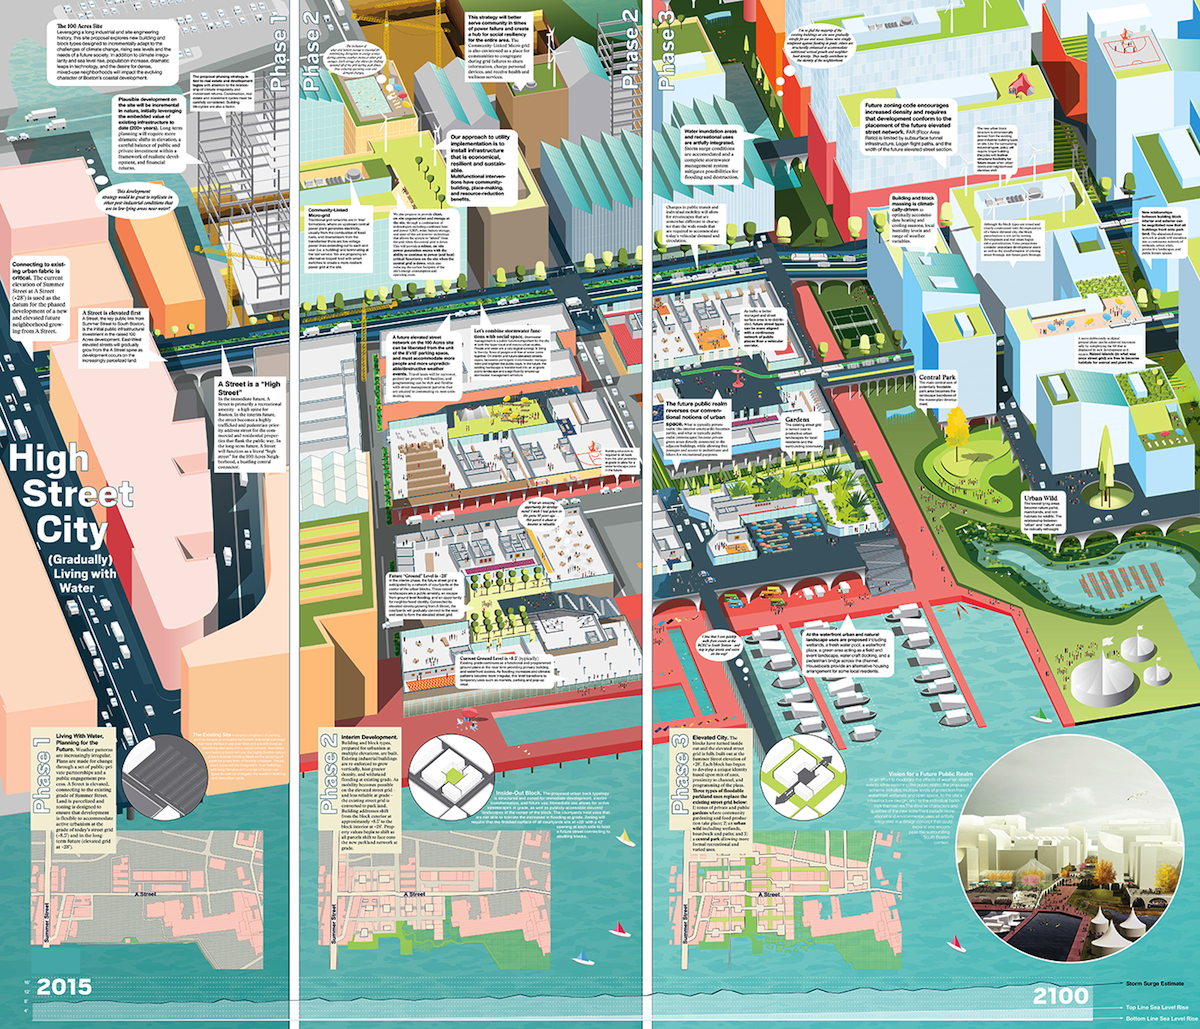 Boston Living with Water selects finalists in resiliency design competition